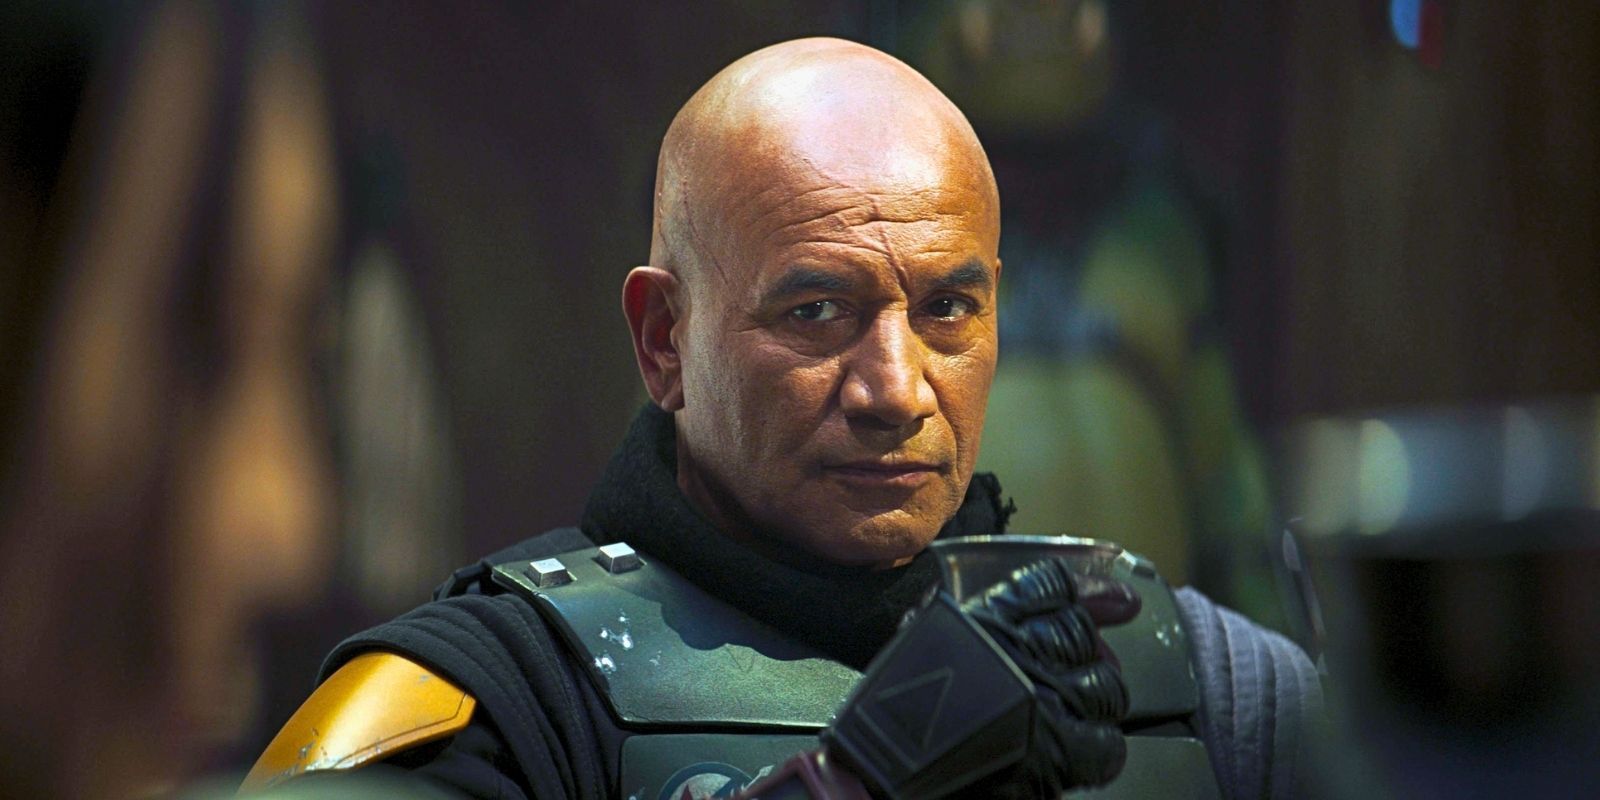 Temuera Morrison as Boba Fett drinking from a goblet in the Star Wars series The Book of Boba Fett